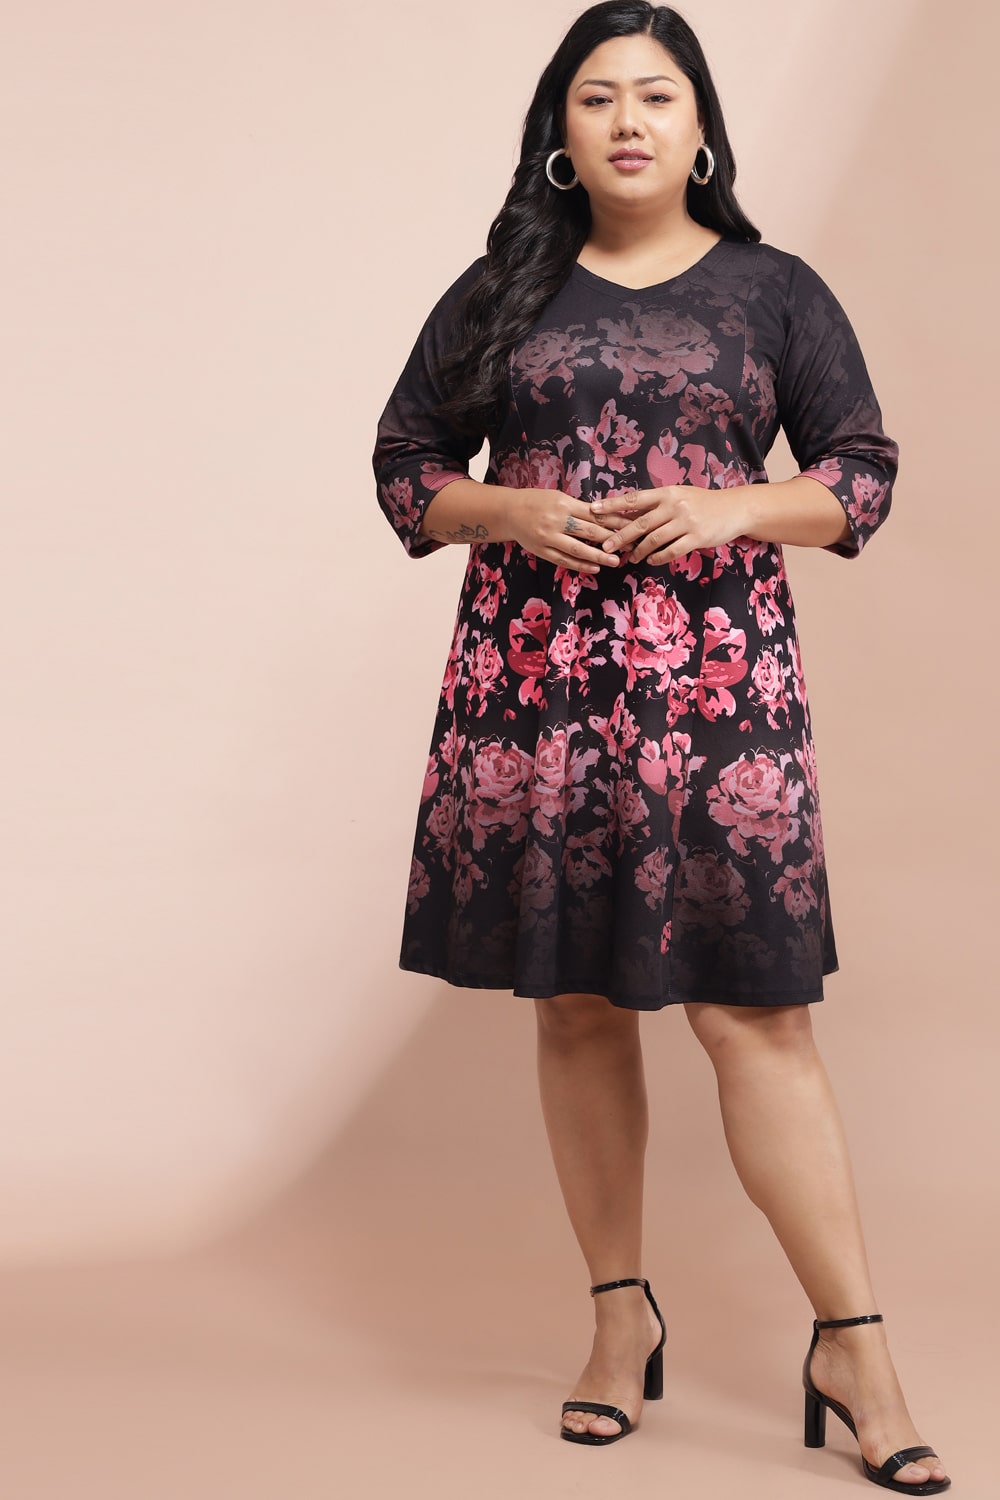 Buy Amydus Printed & Floral Dresses online - Women - 44 products